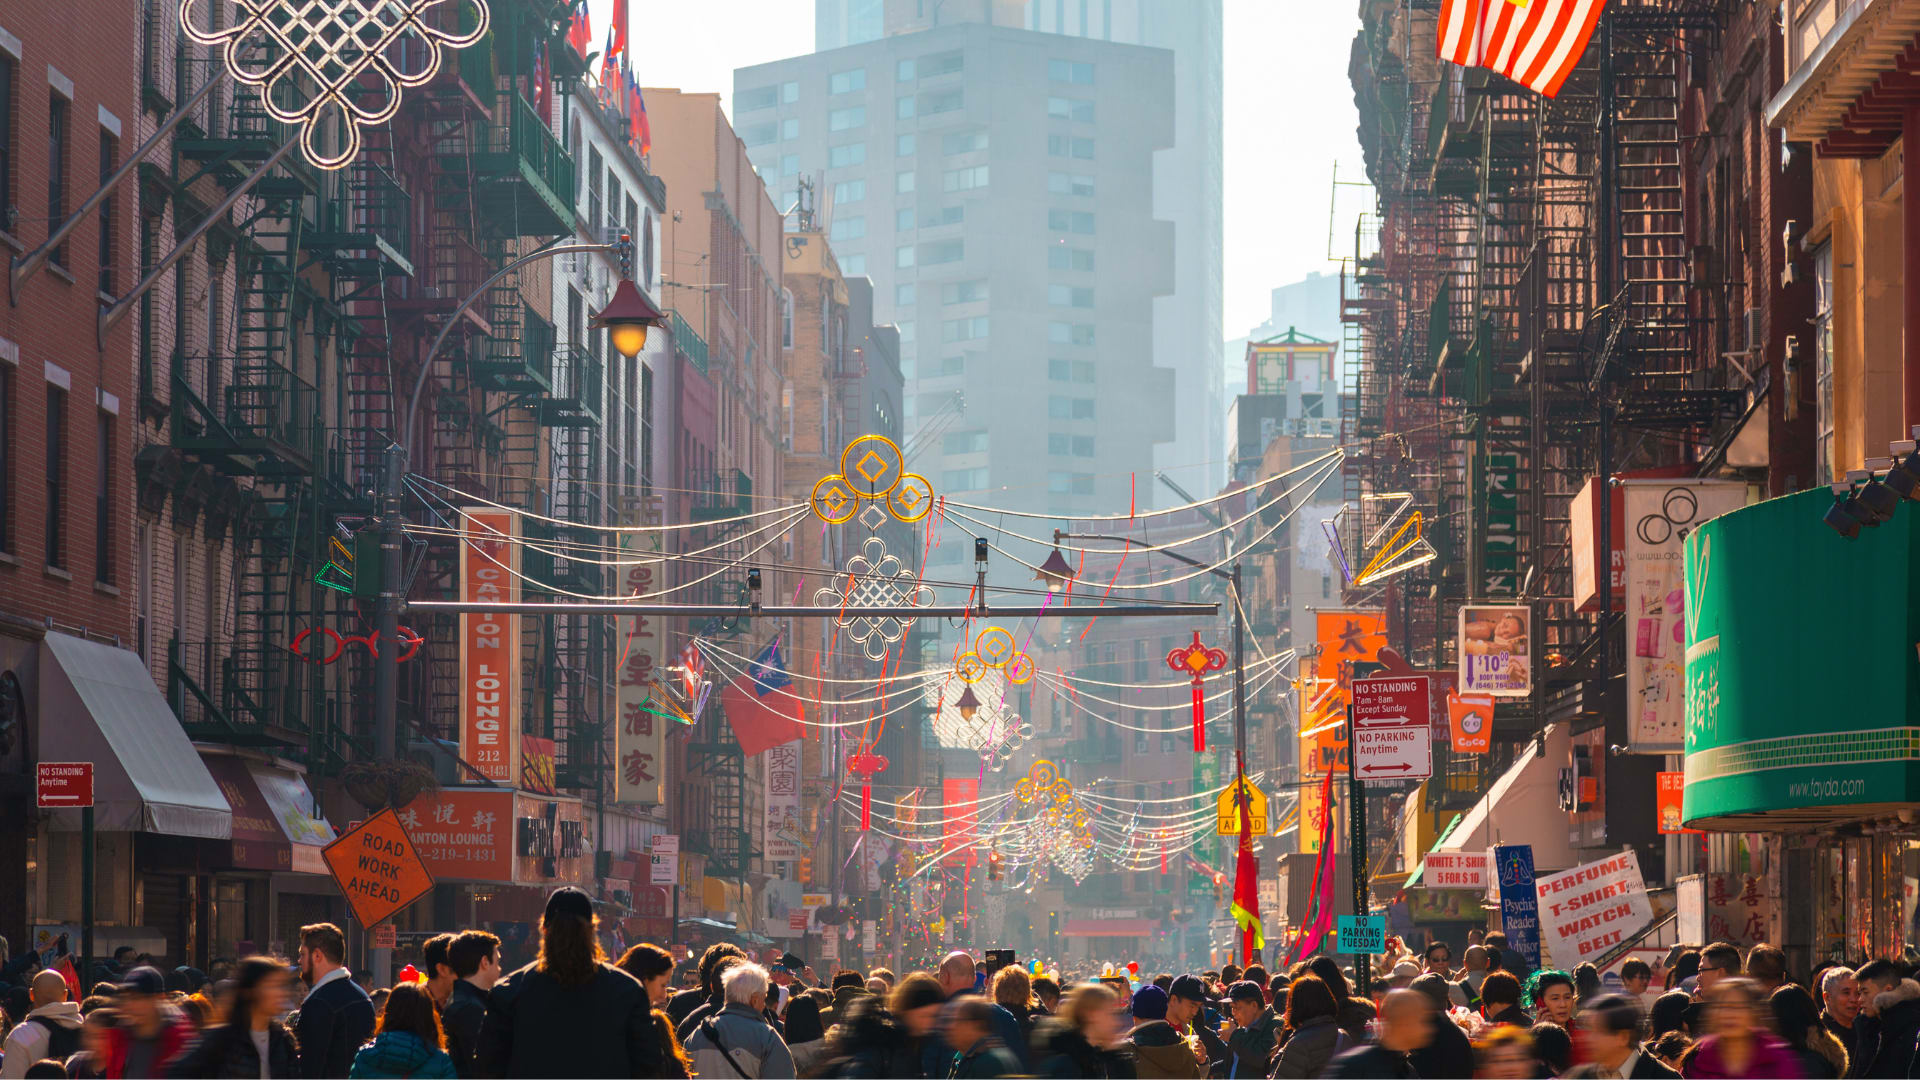 Busy street in Chinatown in New York City, USA